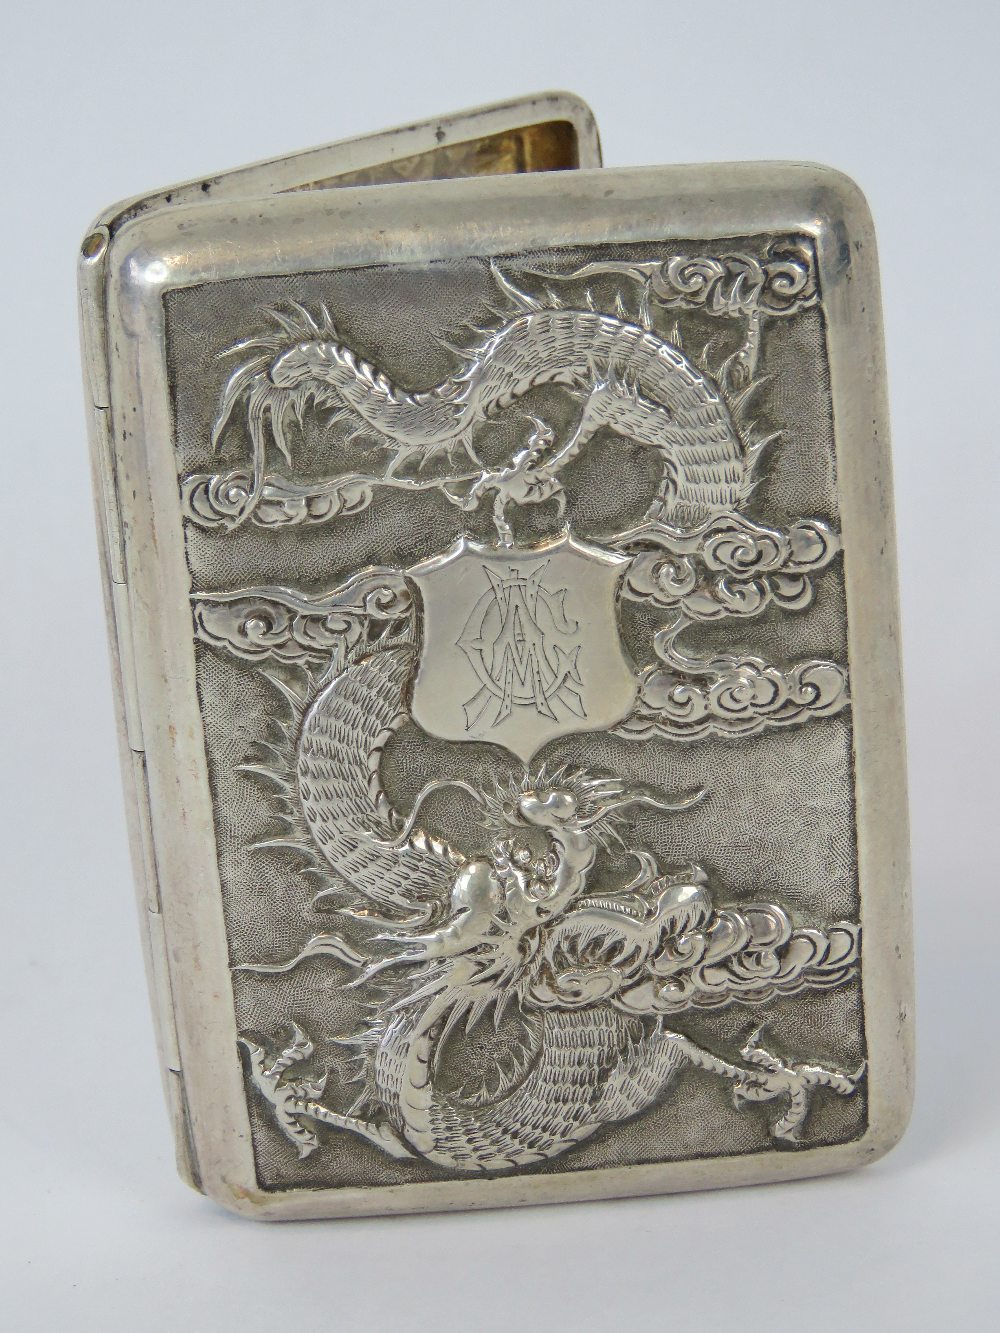 A Chinese white metal cigarette case featuring a repoussé four-toed dragon encircling an engraved